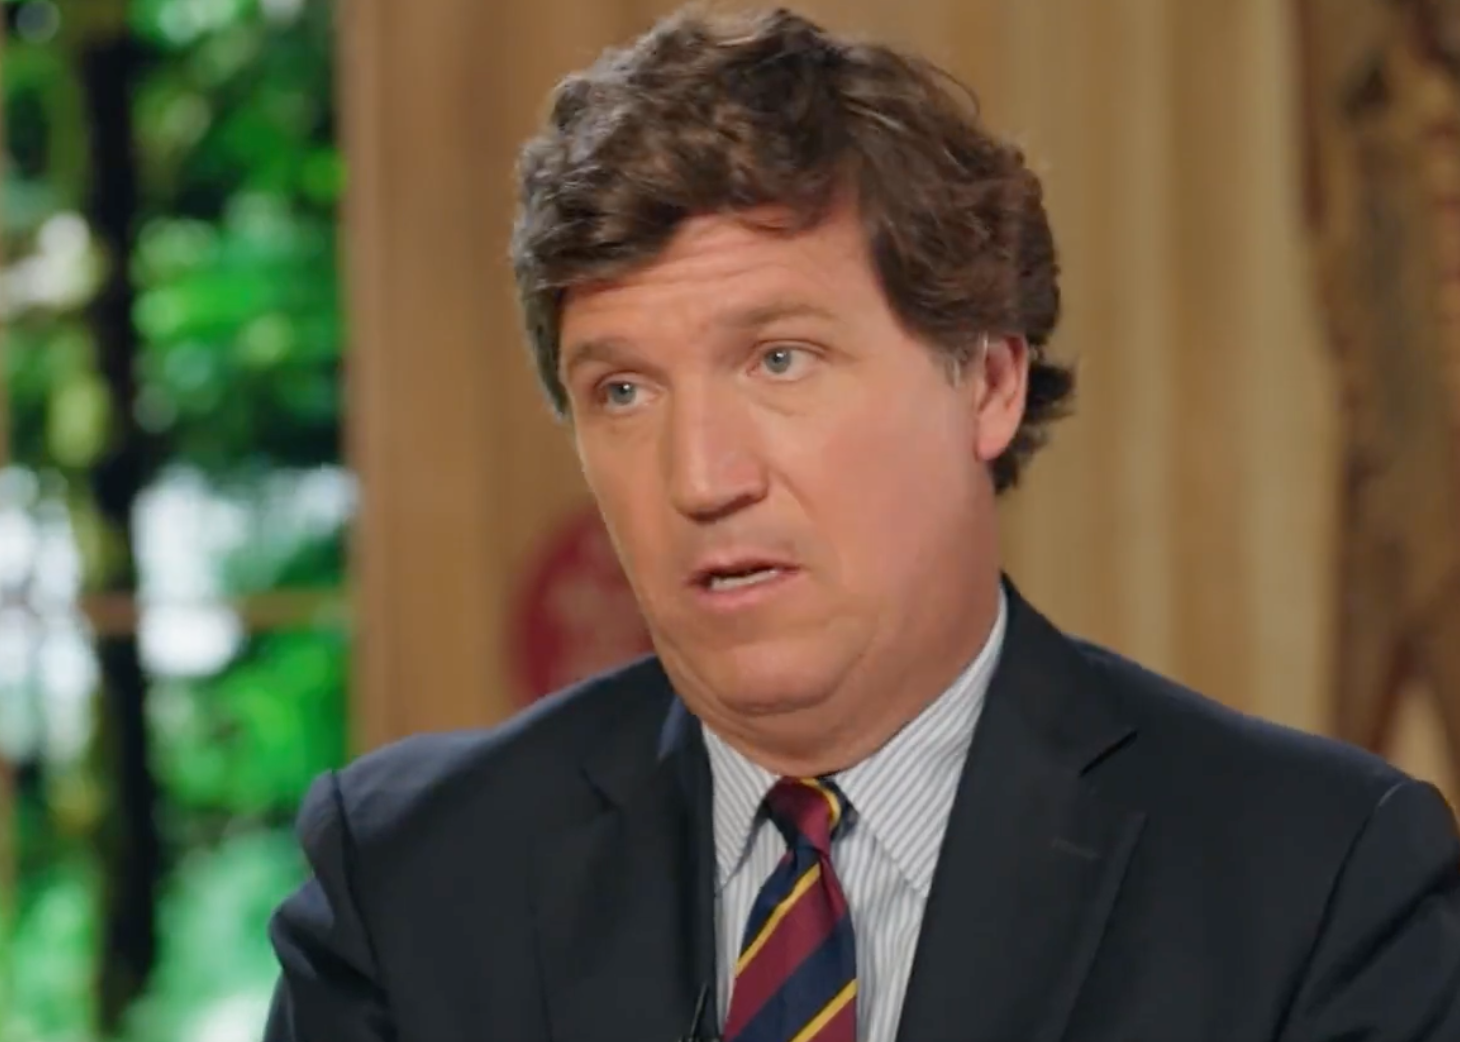 Tucker Carlson reduced to pedaling con artist&#8217;s Obama gay sex claims on social media